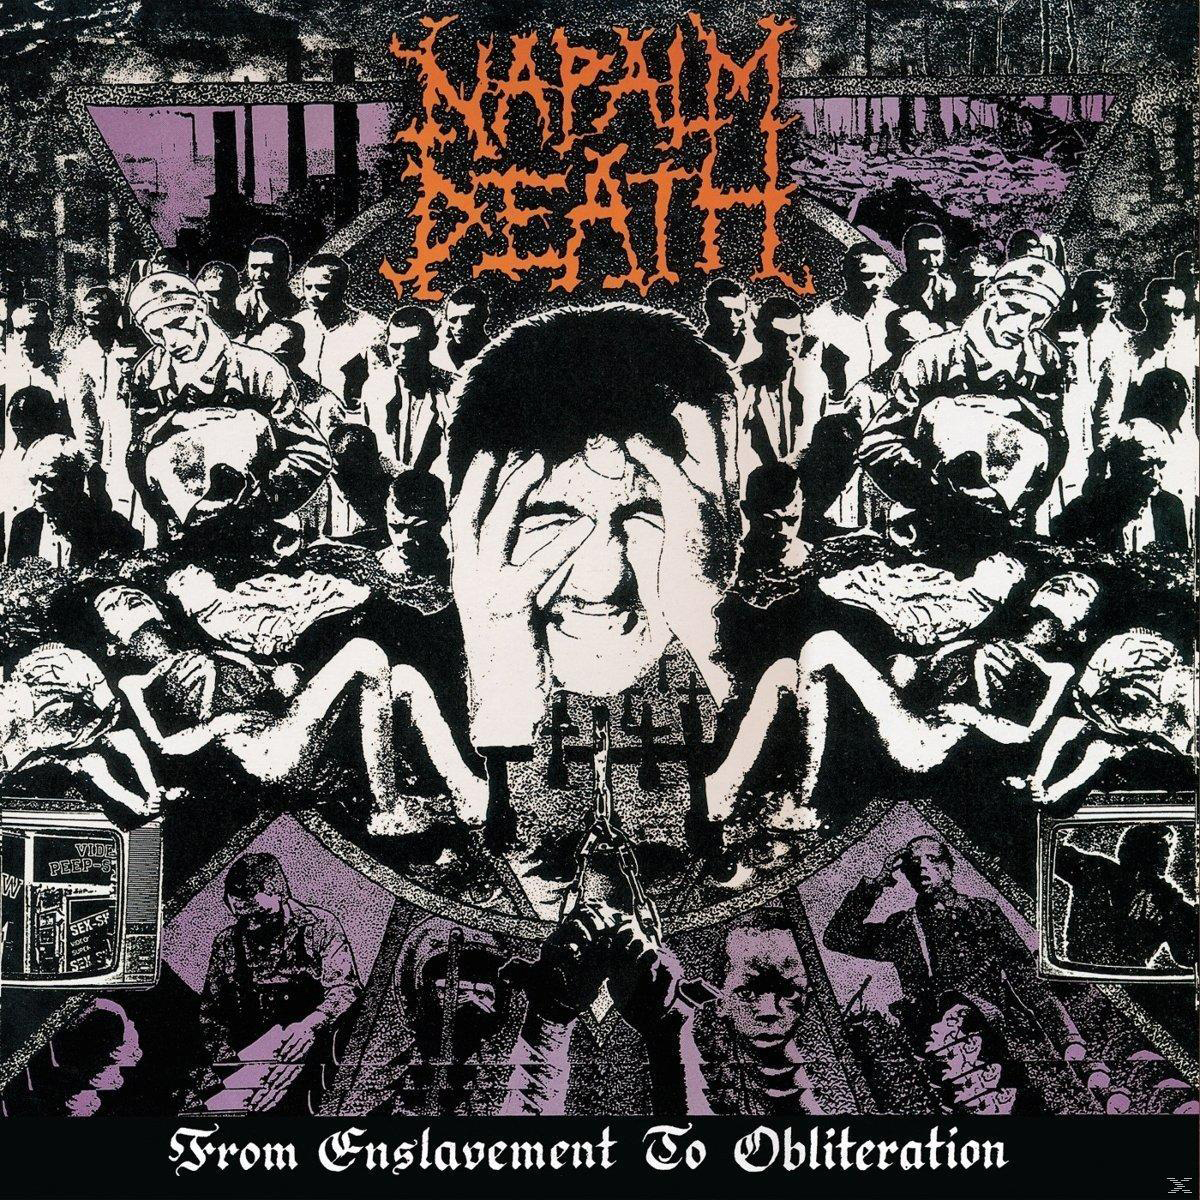 Napalm to Death - Enslavement - From Obliteration (Vinyl)